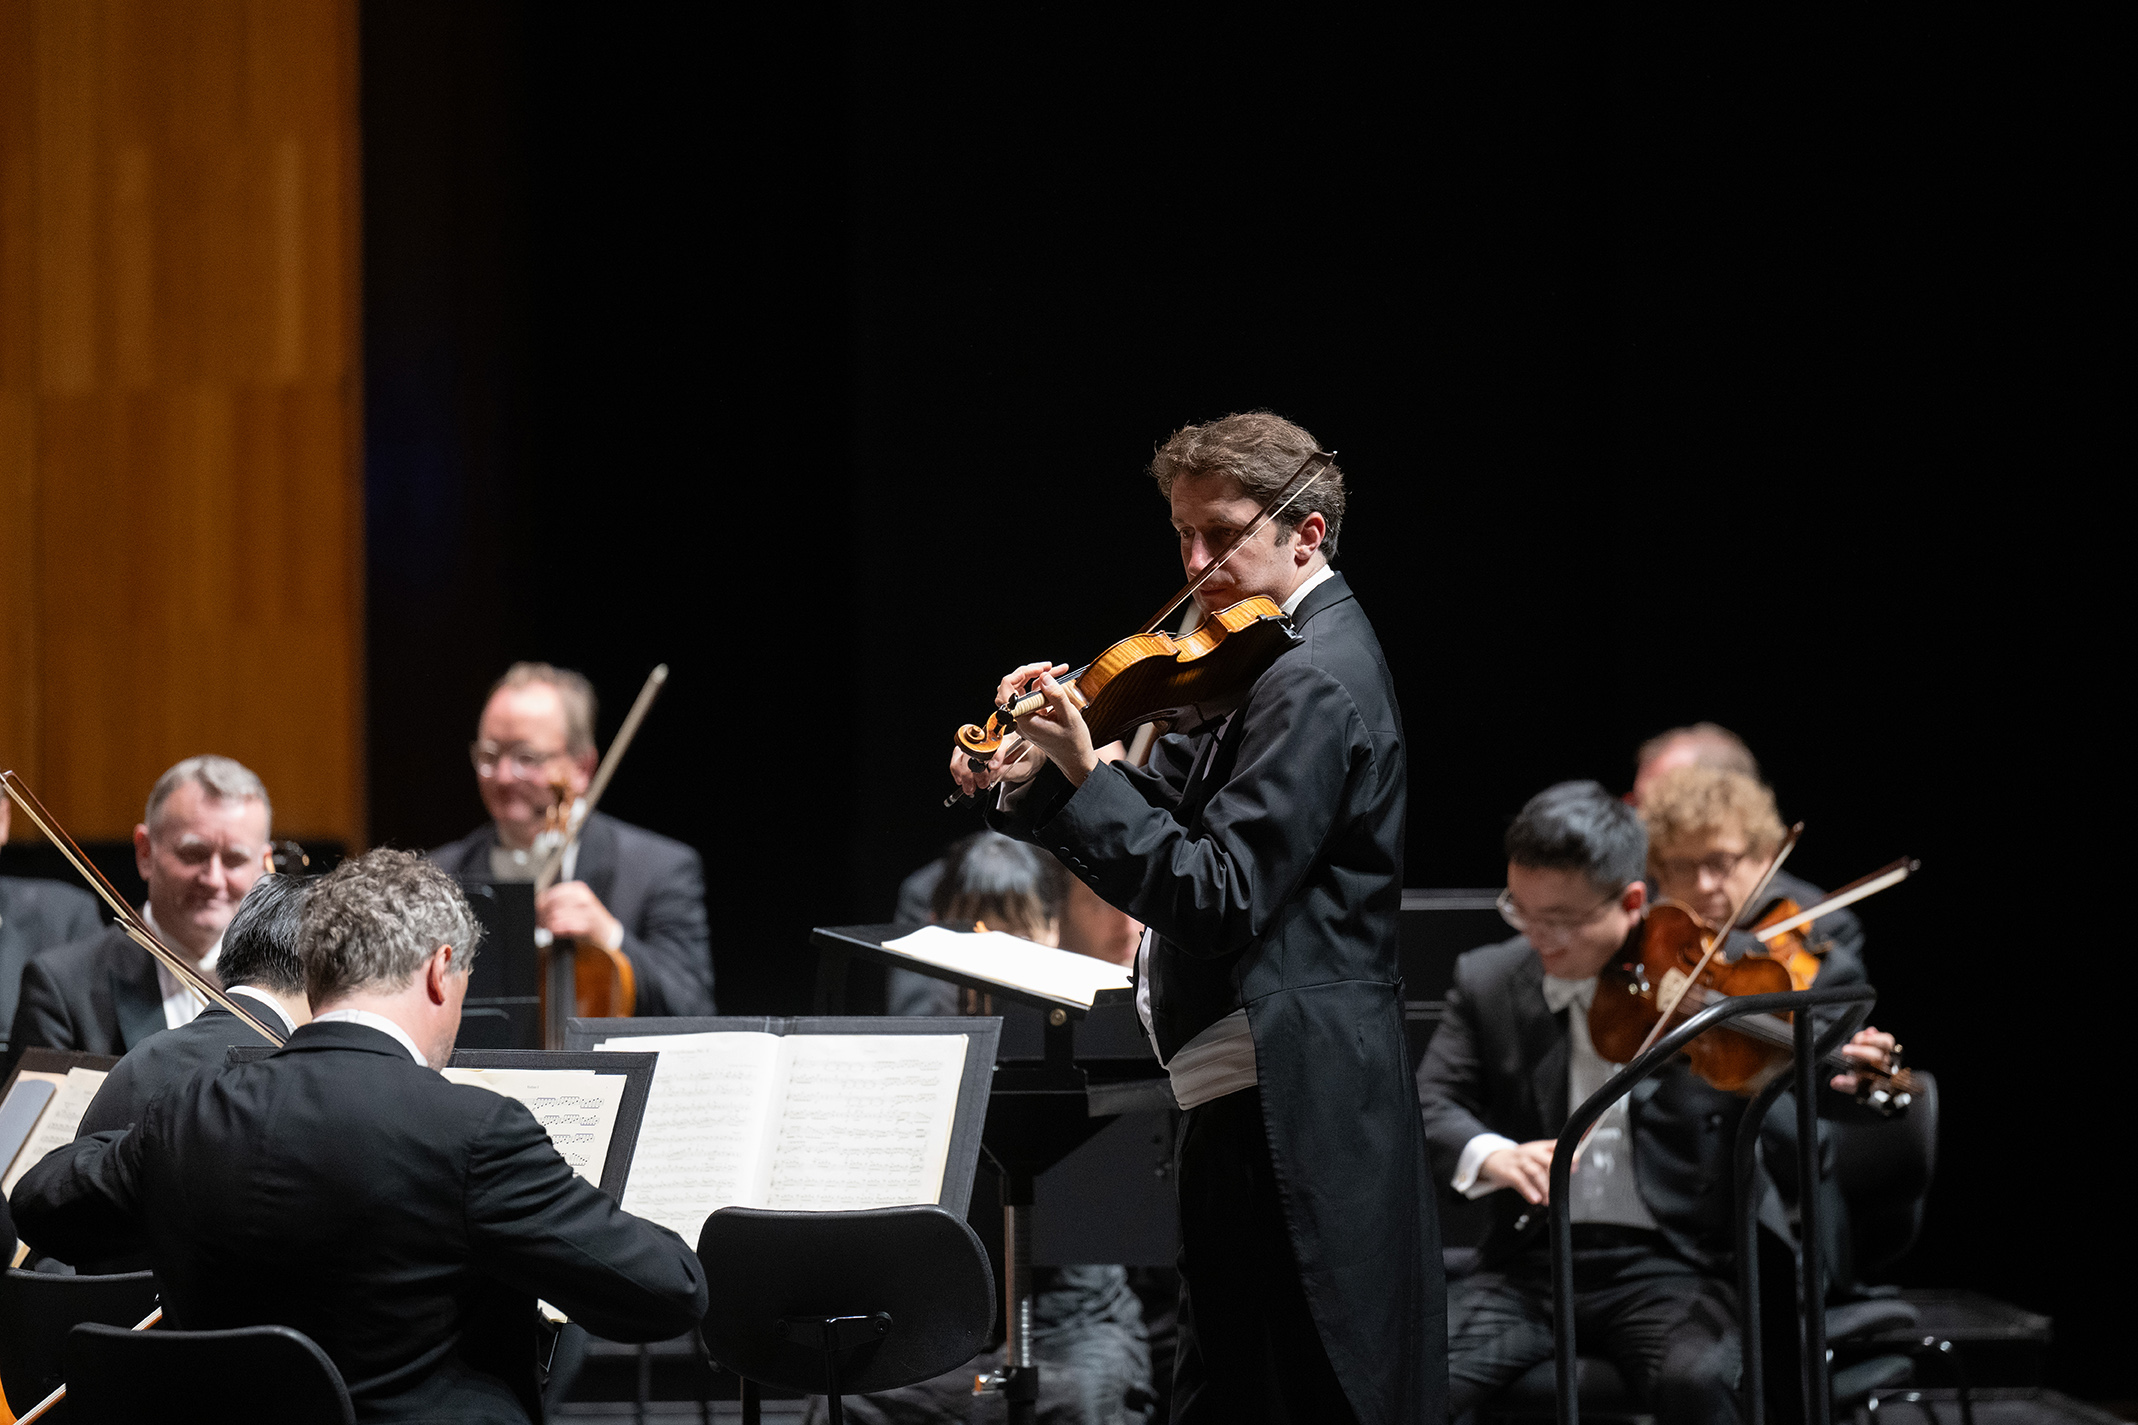 Male violinist among the orchestra tuning together